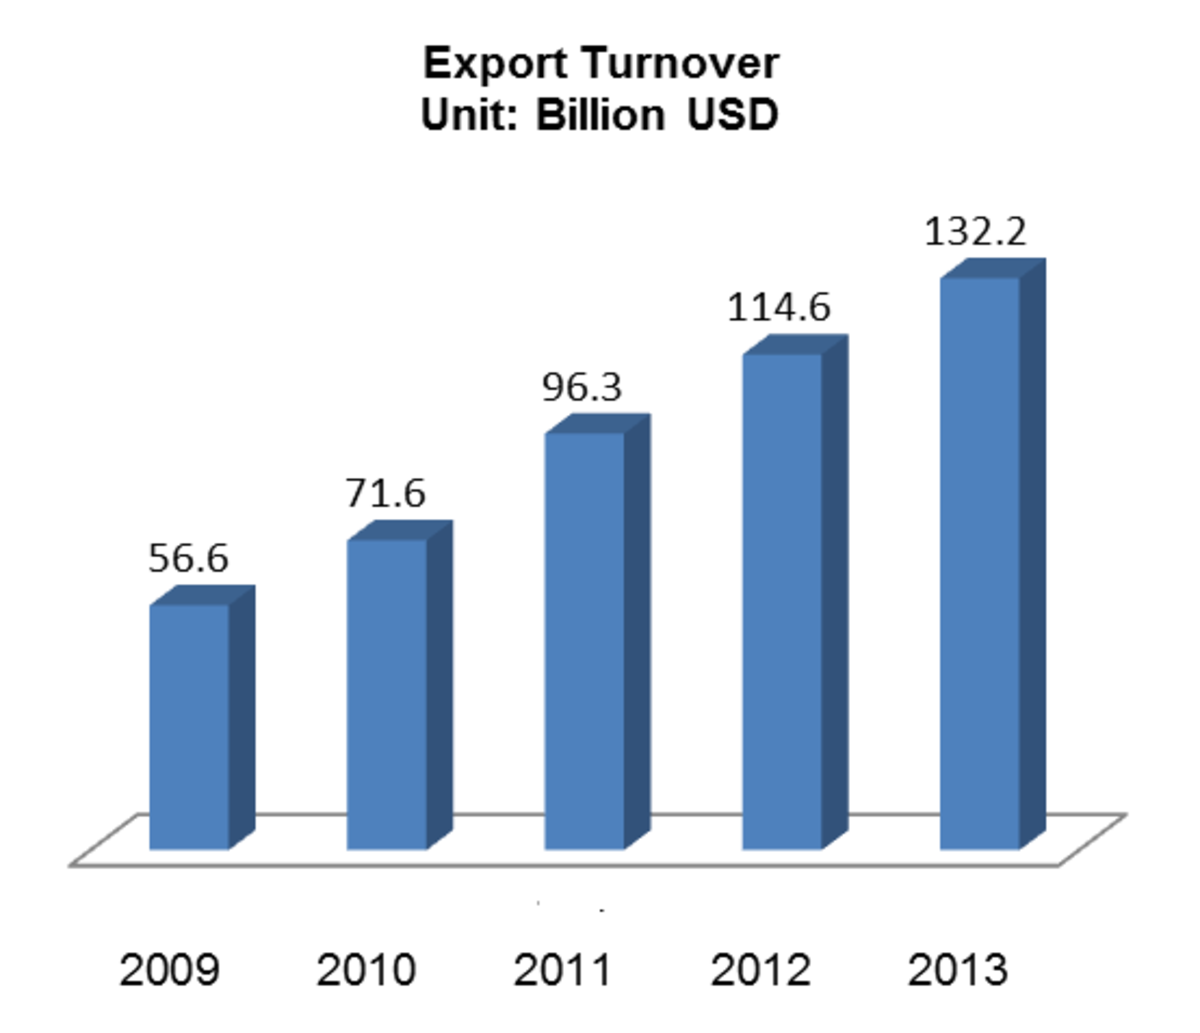 Vietnam export turnover growth, 2009-2013